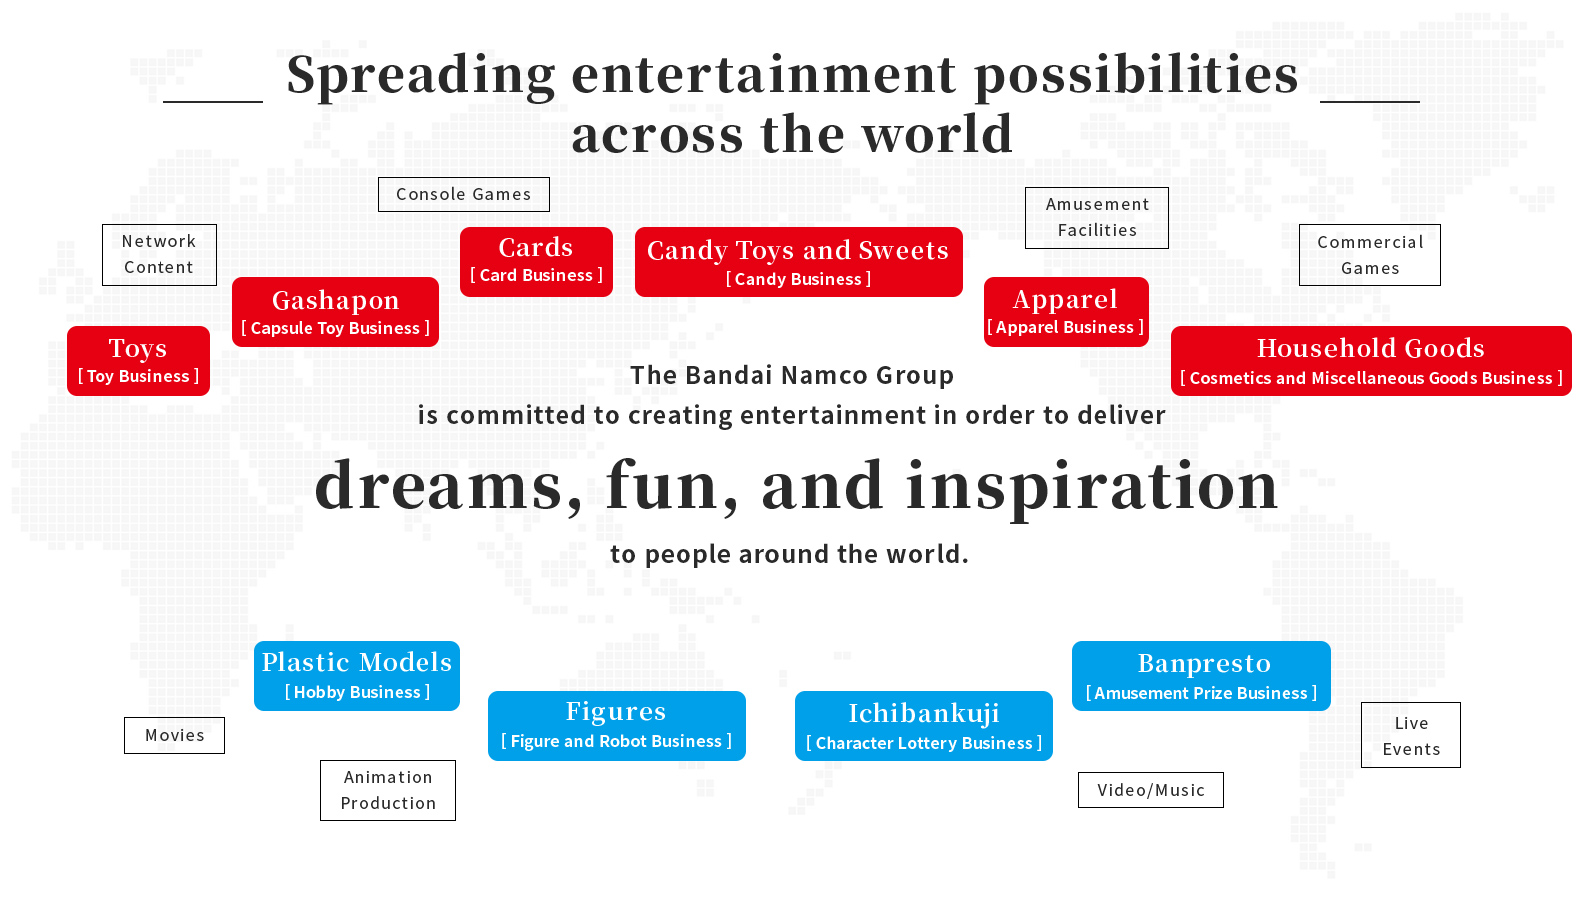 The Bandai Namco Group is committed to creating entertainment in order to deliver dreams, fun, and inspiration to people around the world.